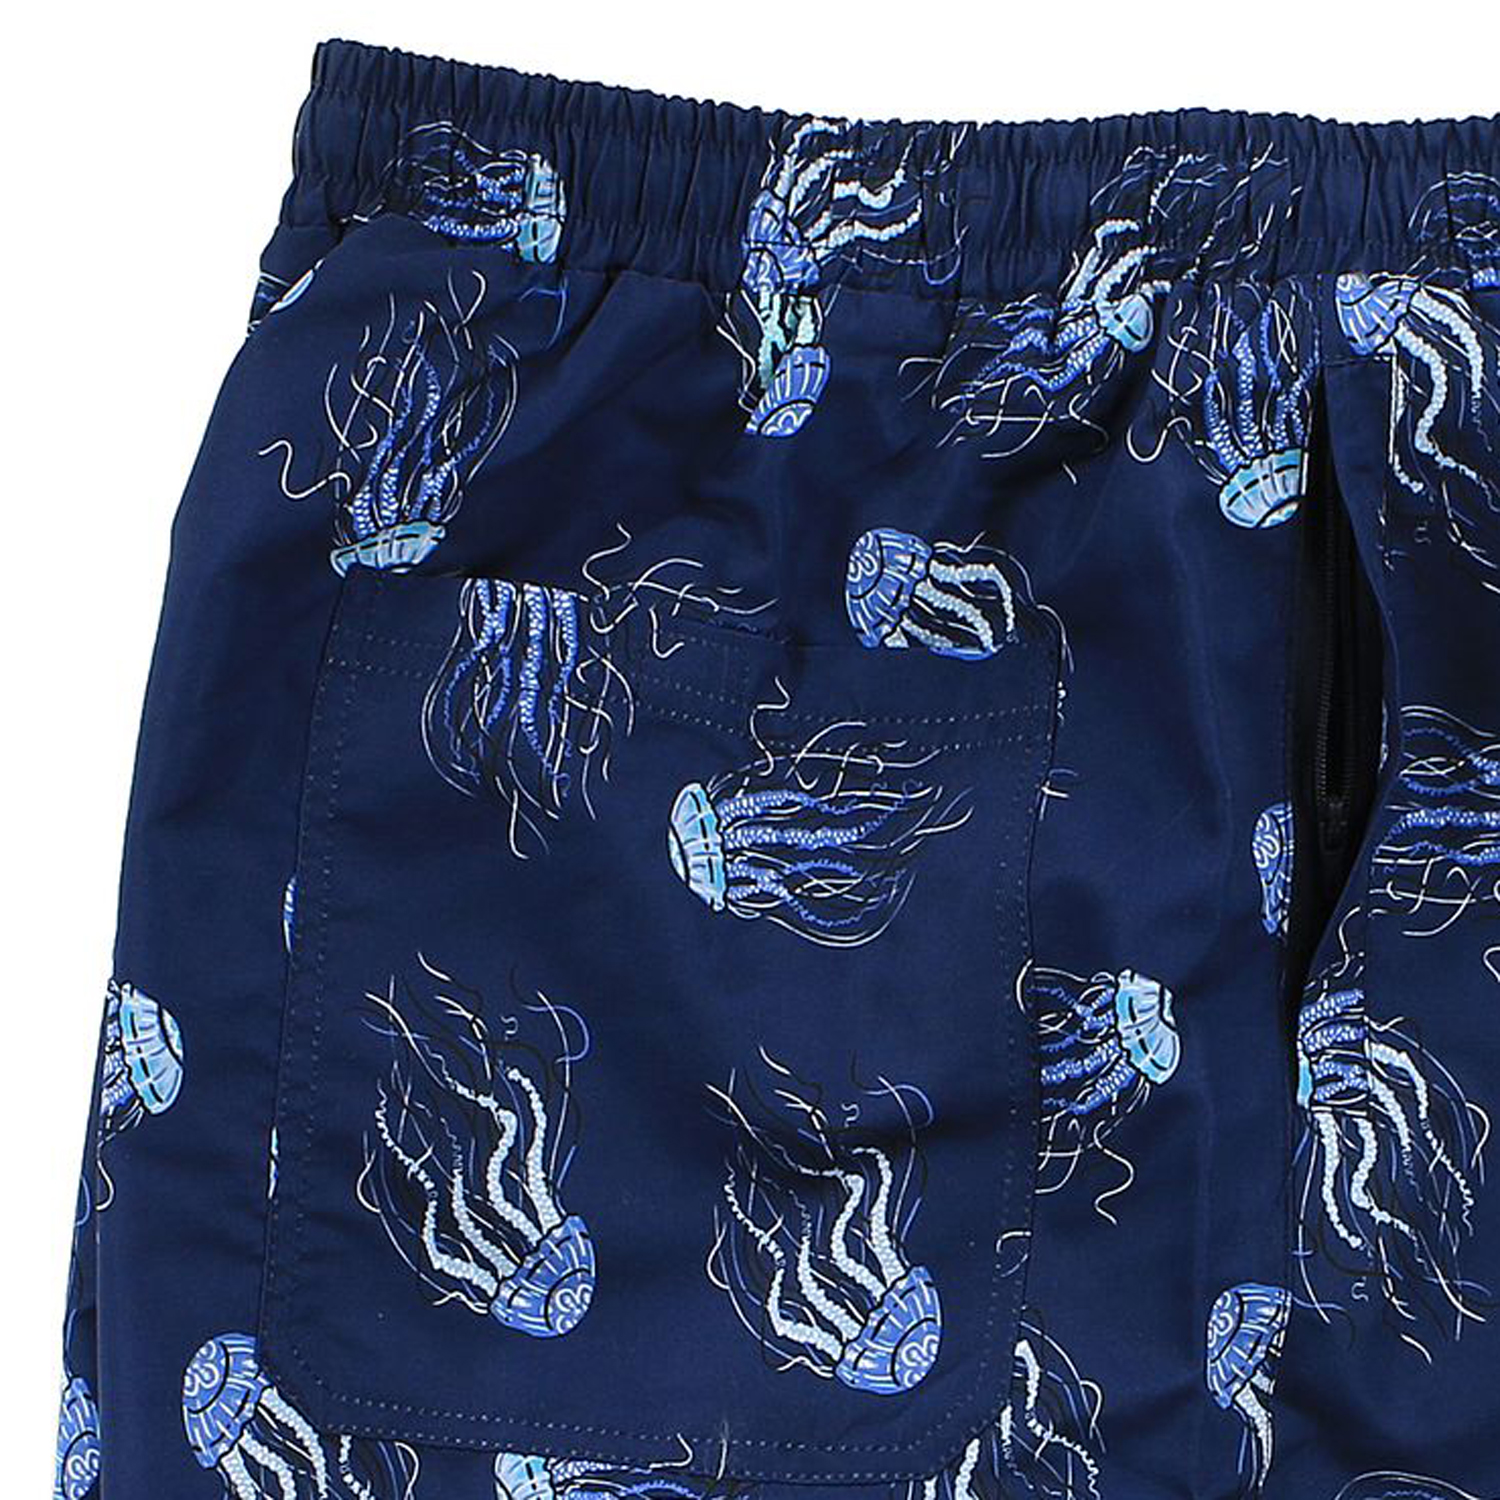 Swimming trunks in blue with jellyfish print by Abraxas up to oversize 10XL